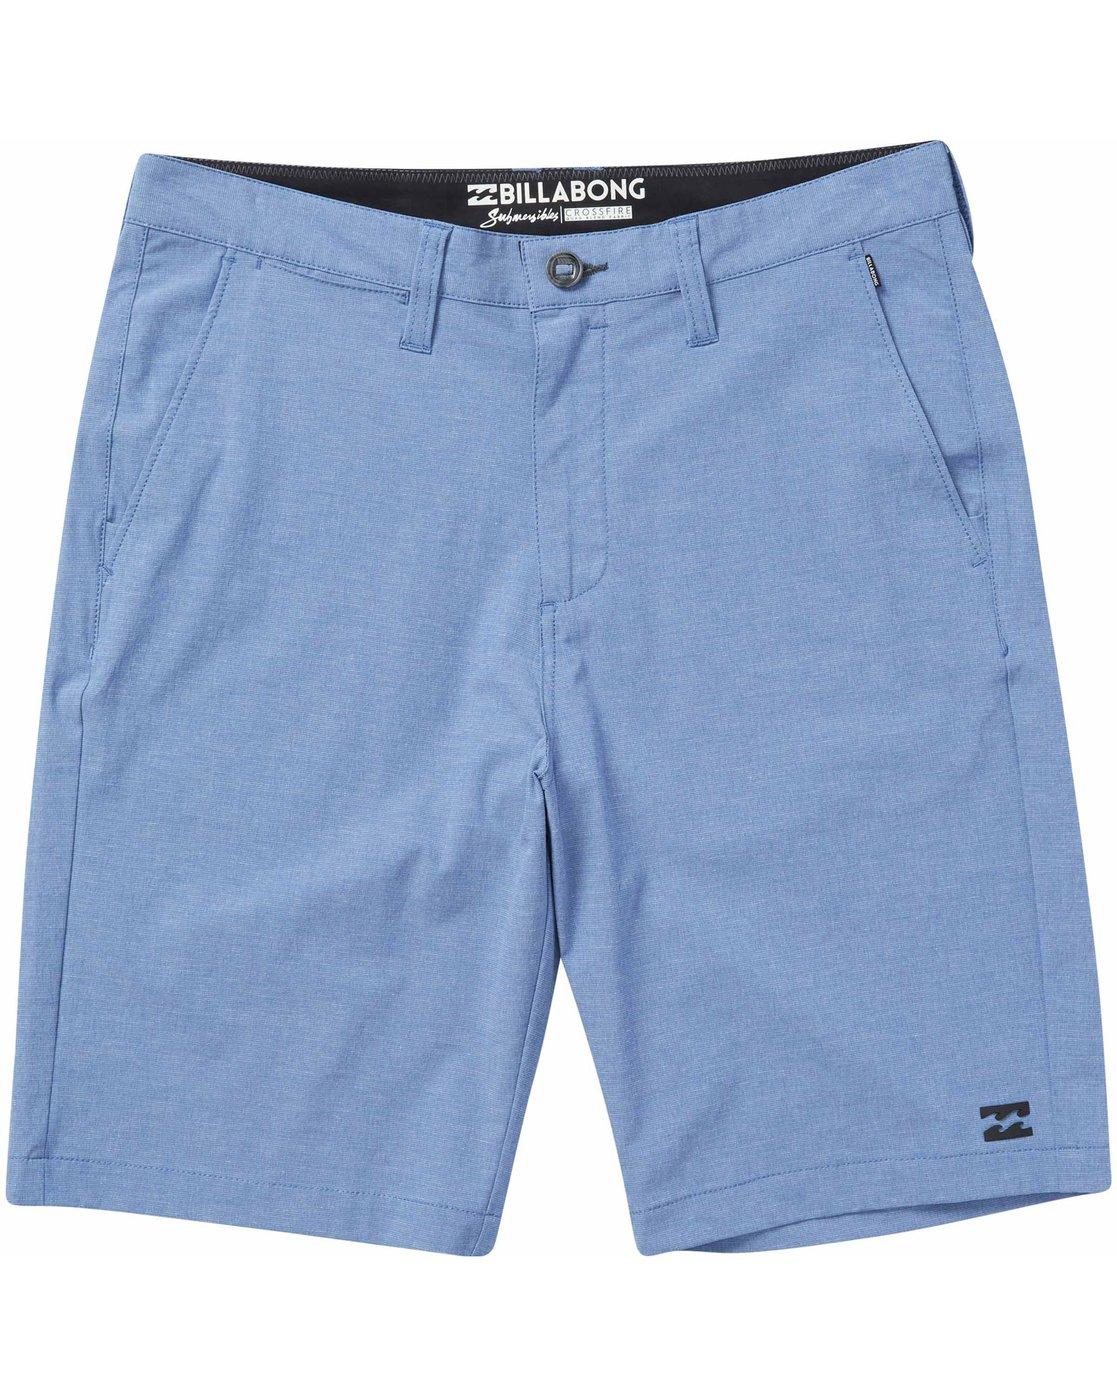 Billabong Crossfire X Submersibles Shorts in Blue for Men - Lyst